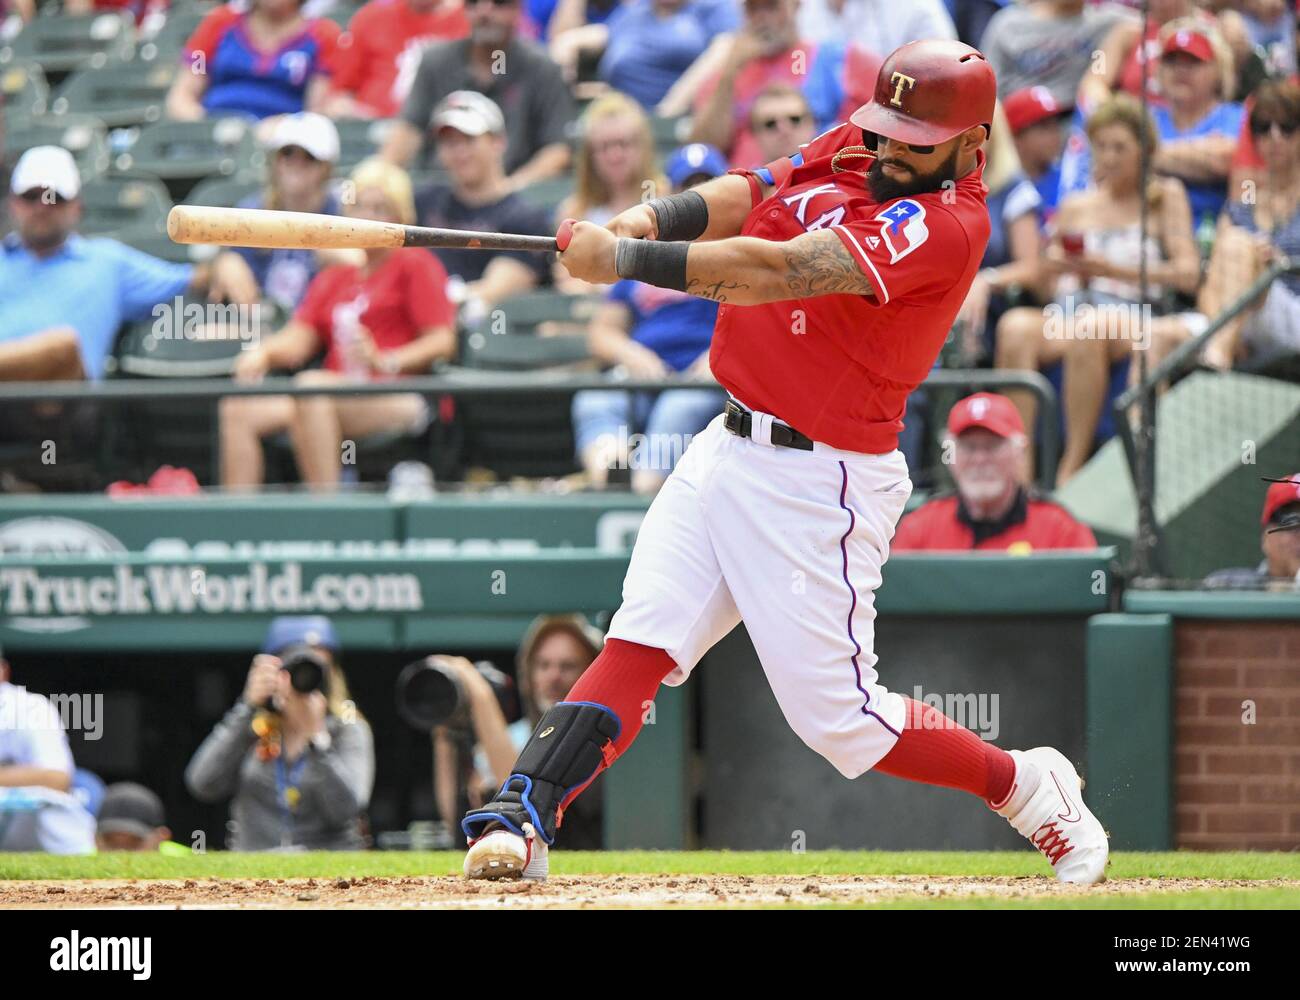 June 02, 2019: Texas Rangers second baseman Rougned Odor #12 pulls up his  pants above his knees like shorts as a tip of the cap to fellow teammate  Hunter Pence who has